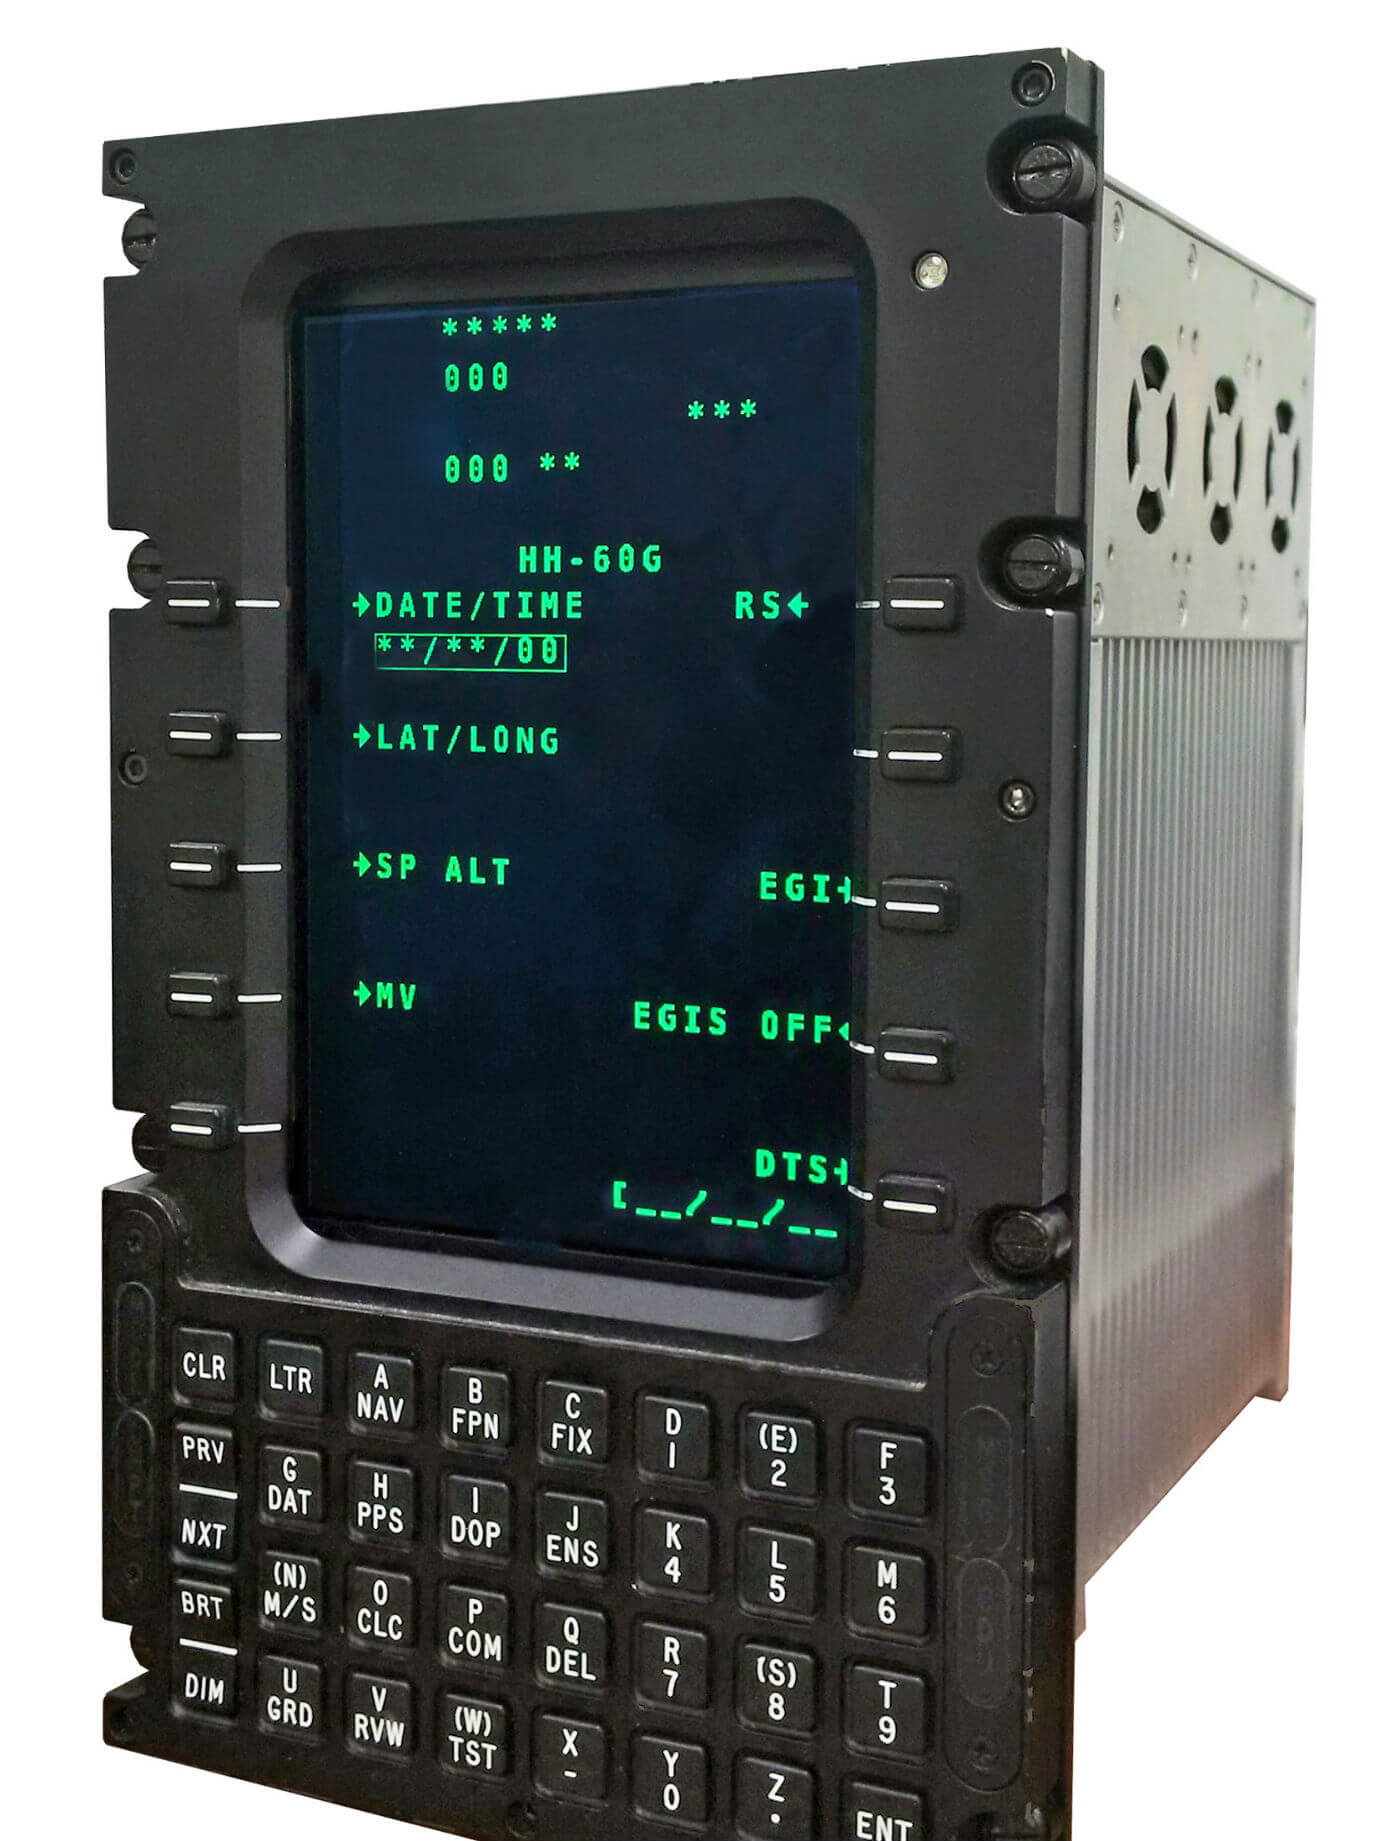 The CMA-2082M is an intelligent, self-contained multifunction control and display unit that integrates and provides centralized control of navigation sensors, communications radios, displays, mission avionics and aircraft systems. Esterline Photo